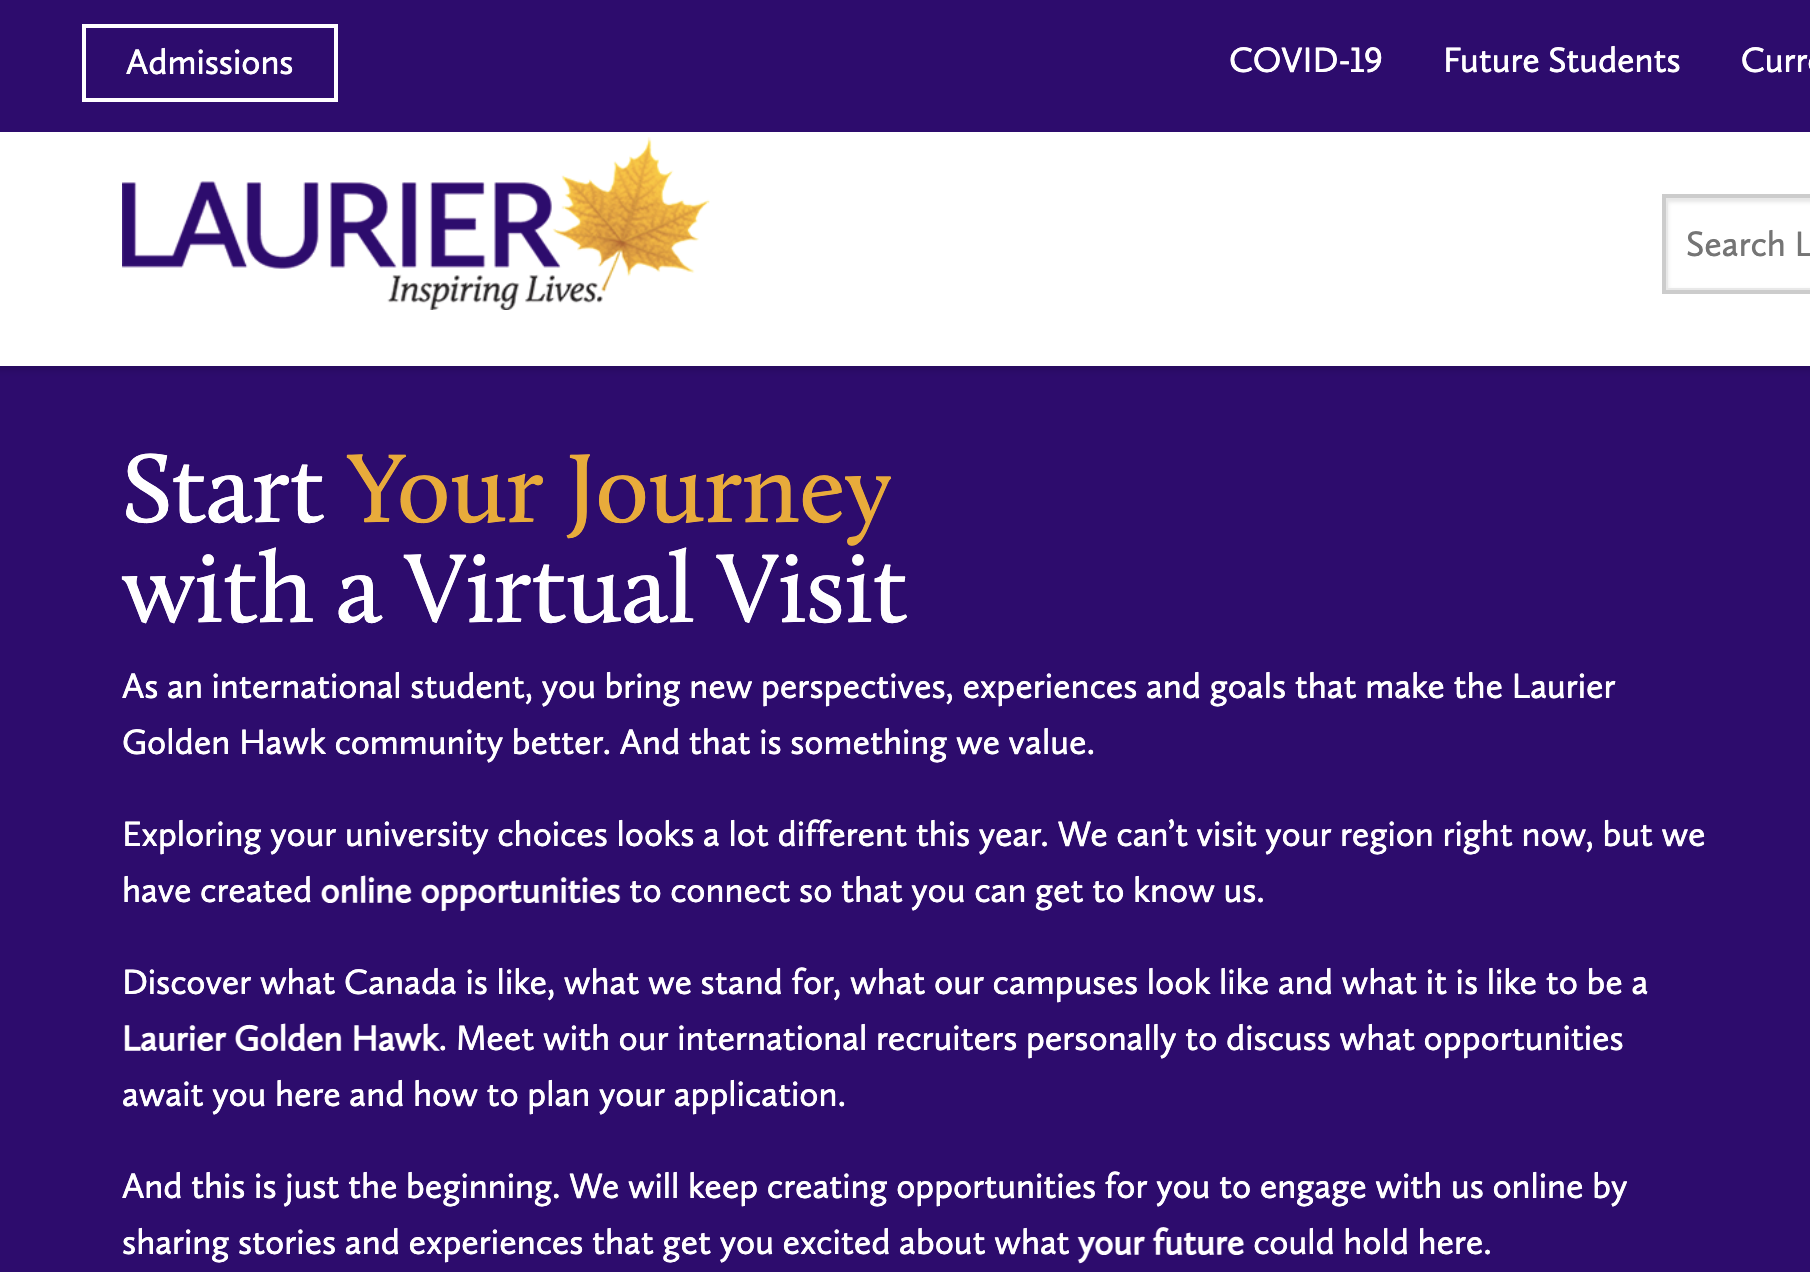 laurier-banner-personalization.png